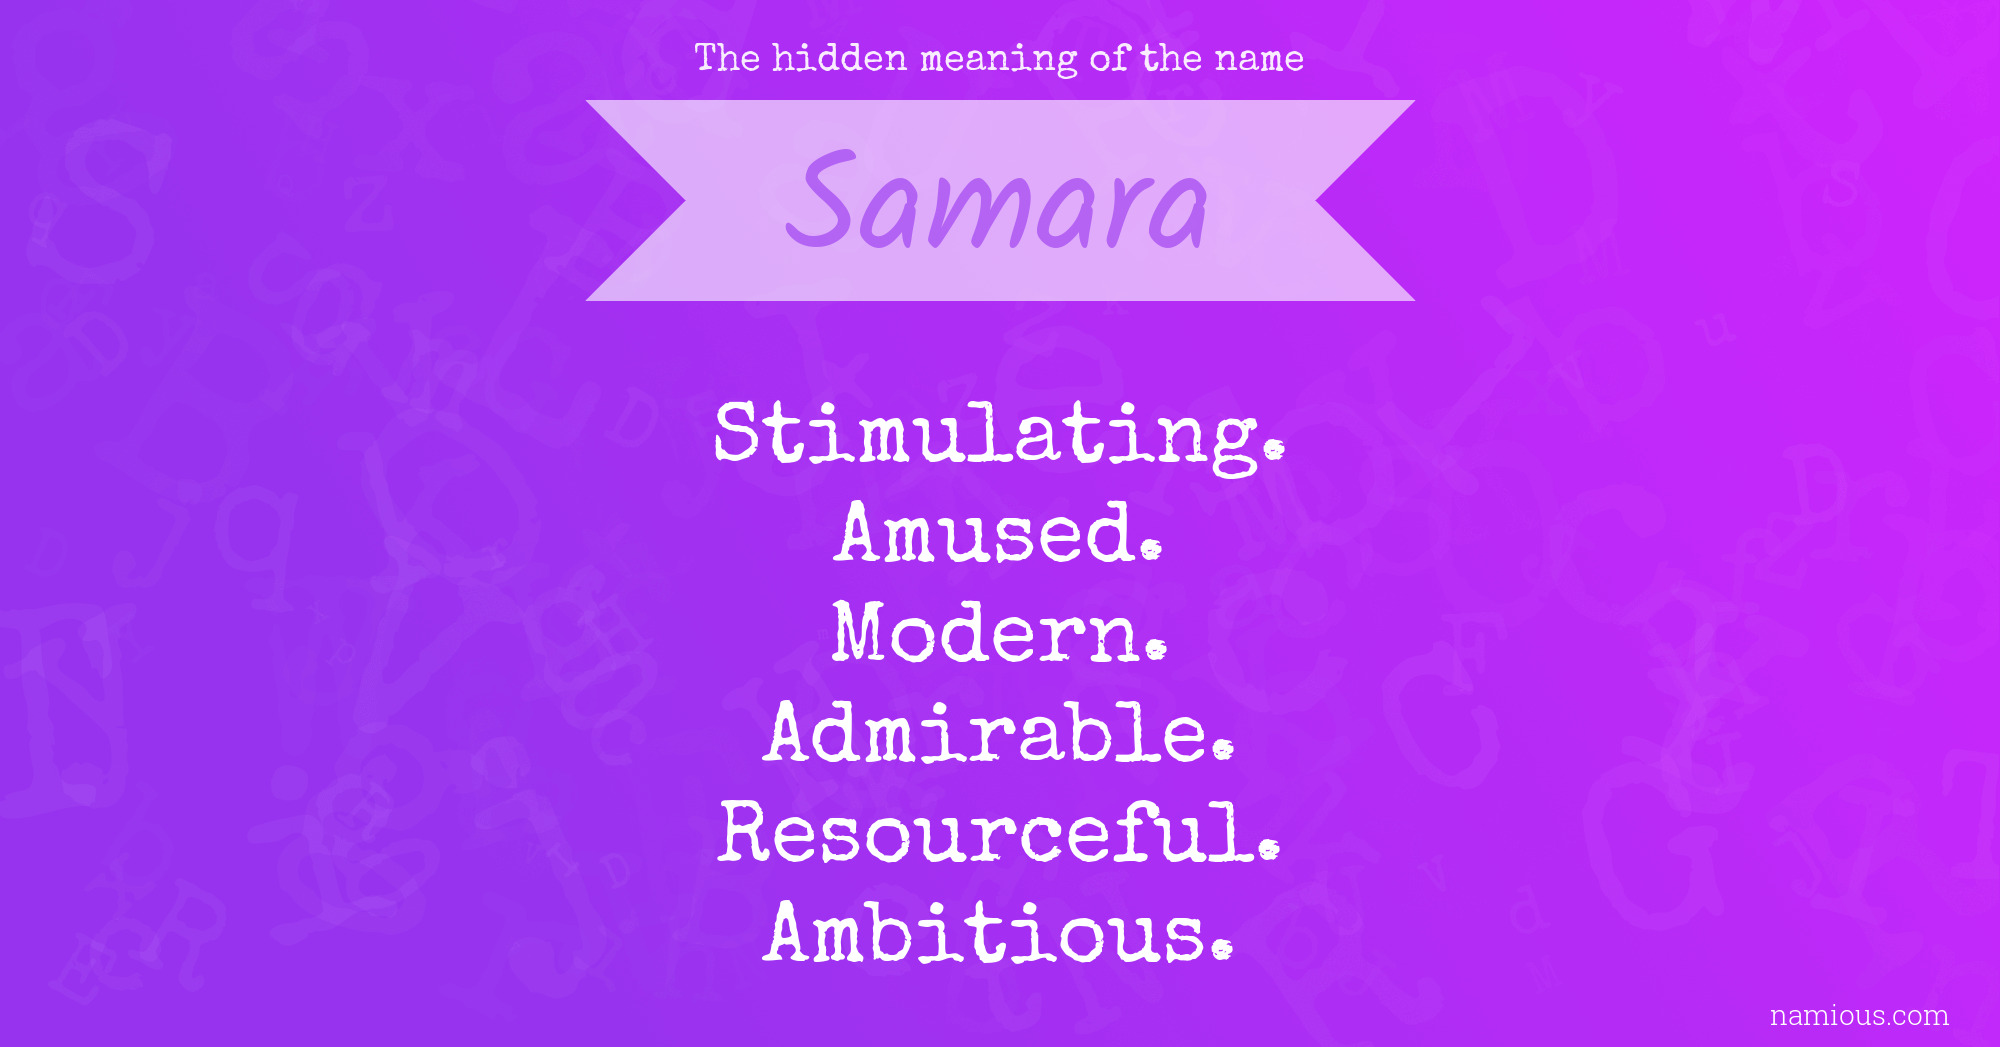 The hidden meaning of the name Samara